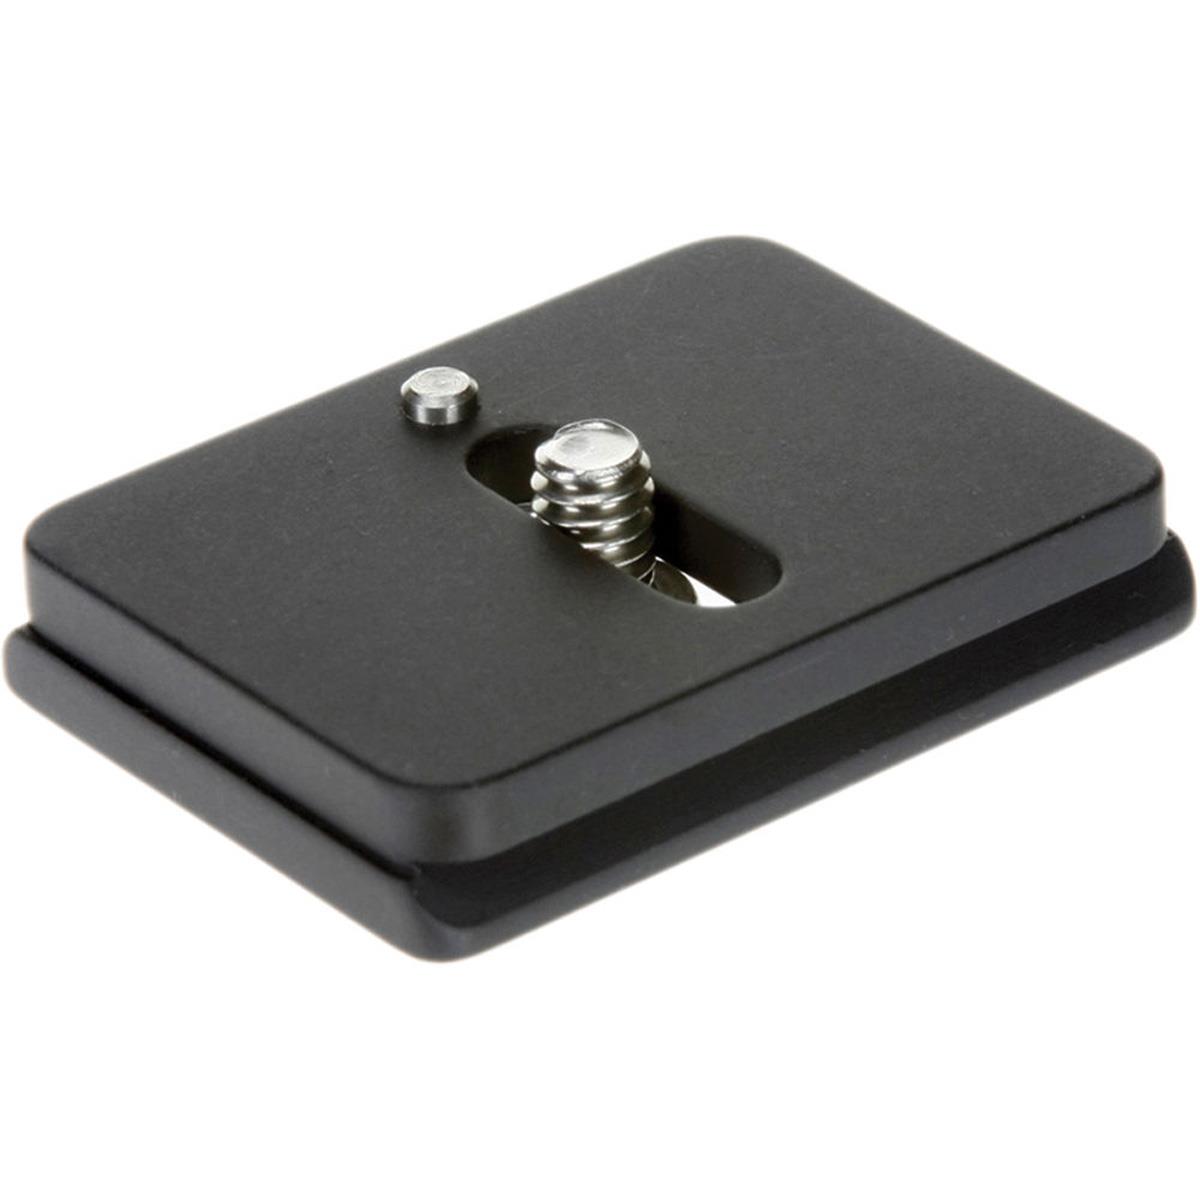 Image of Acratech 2175 Quick Release Plate for Olympus E-620